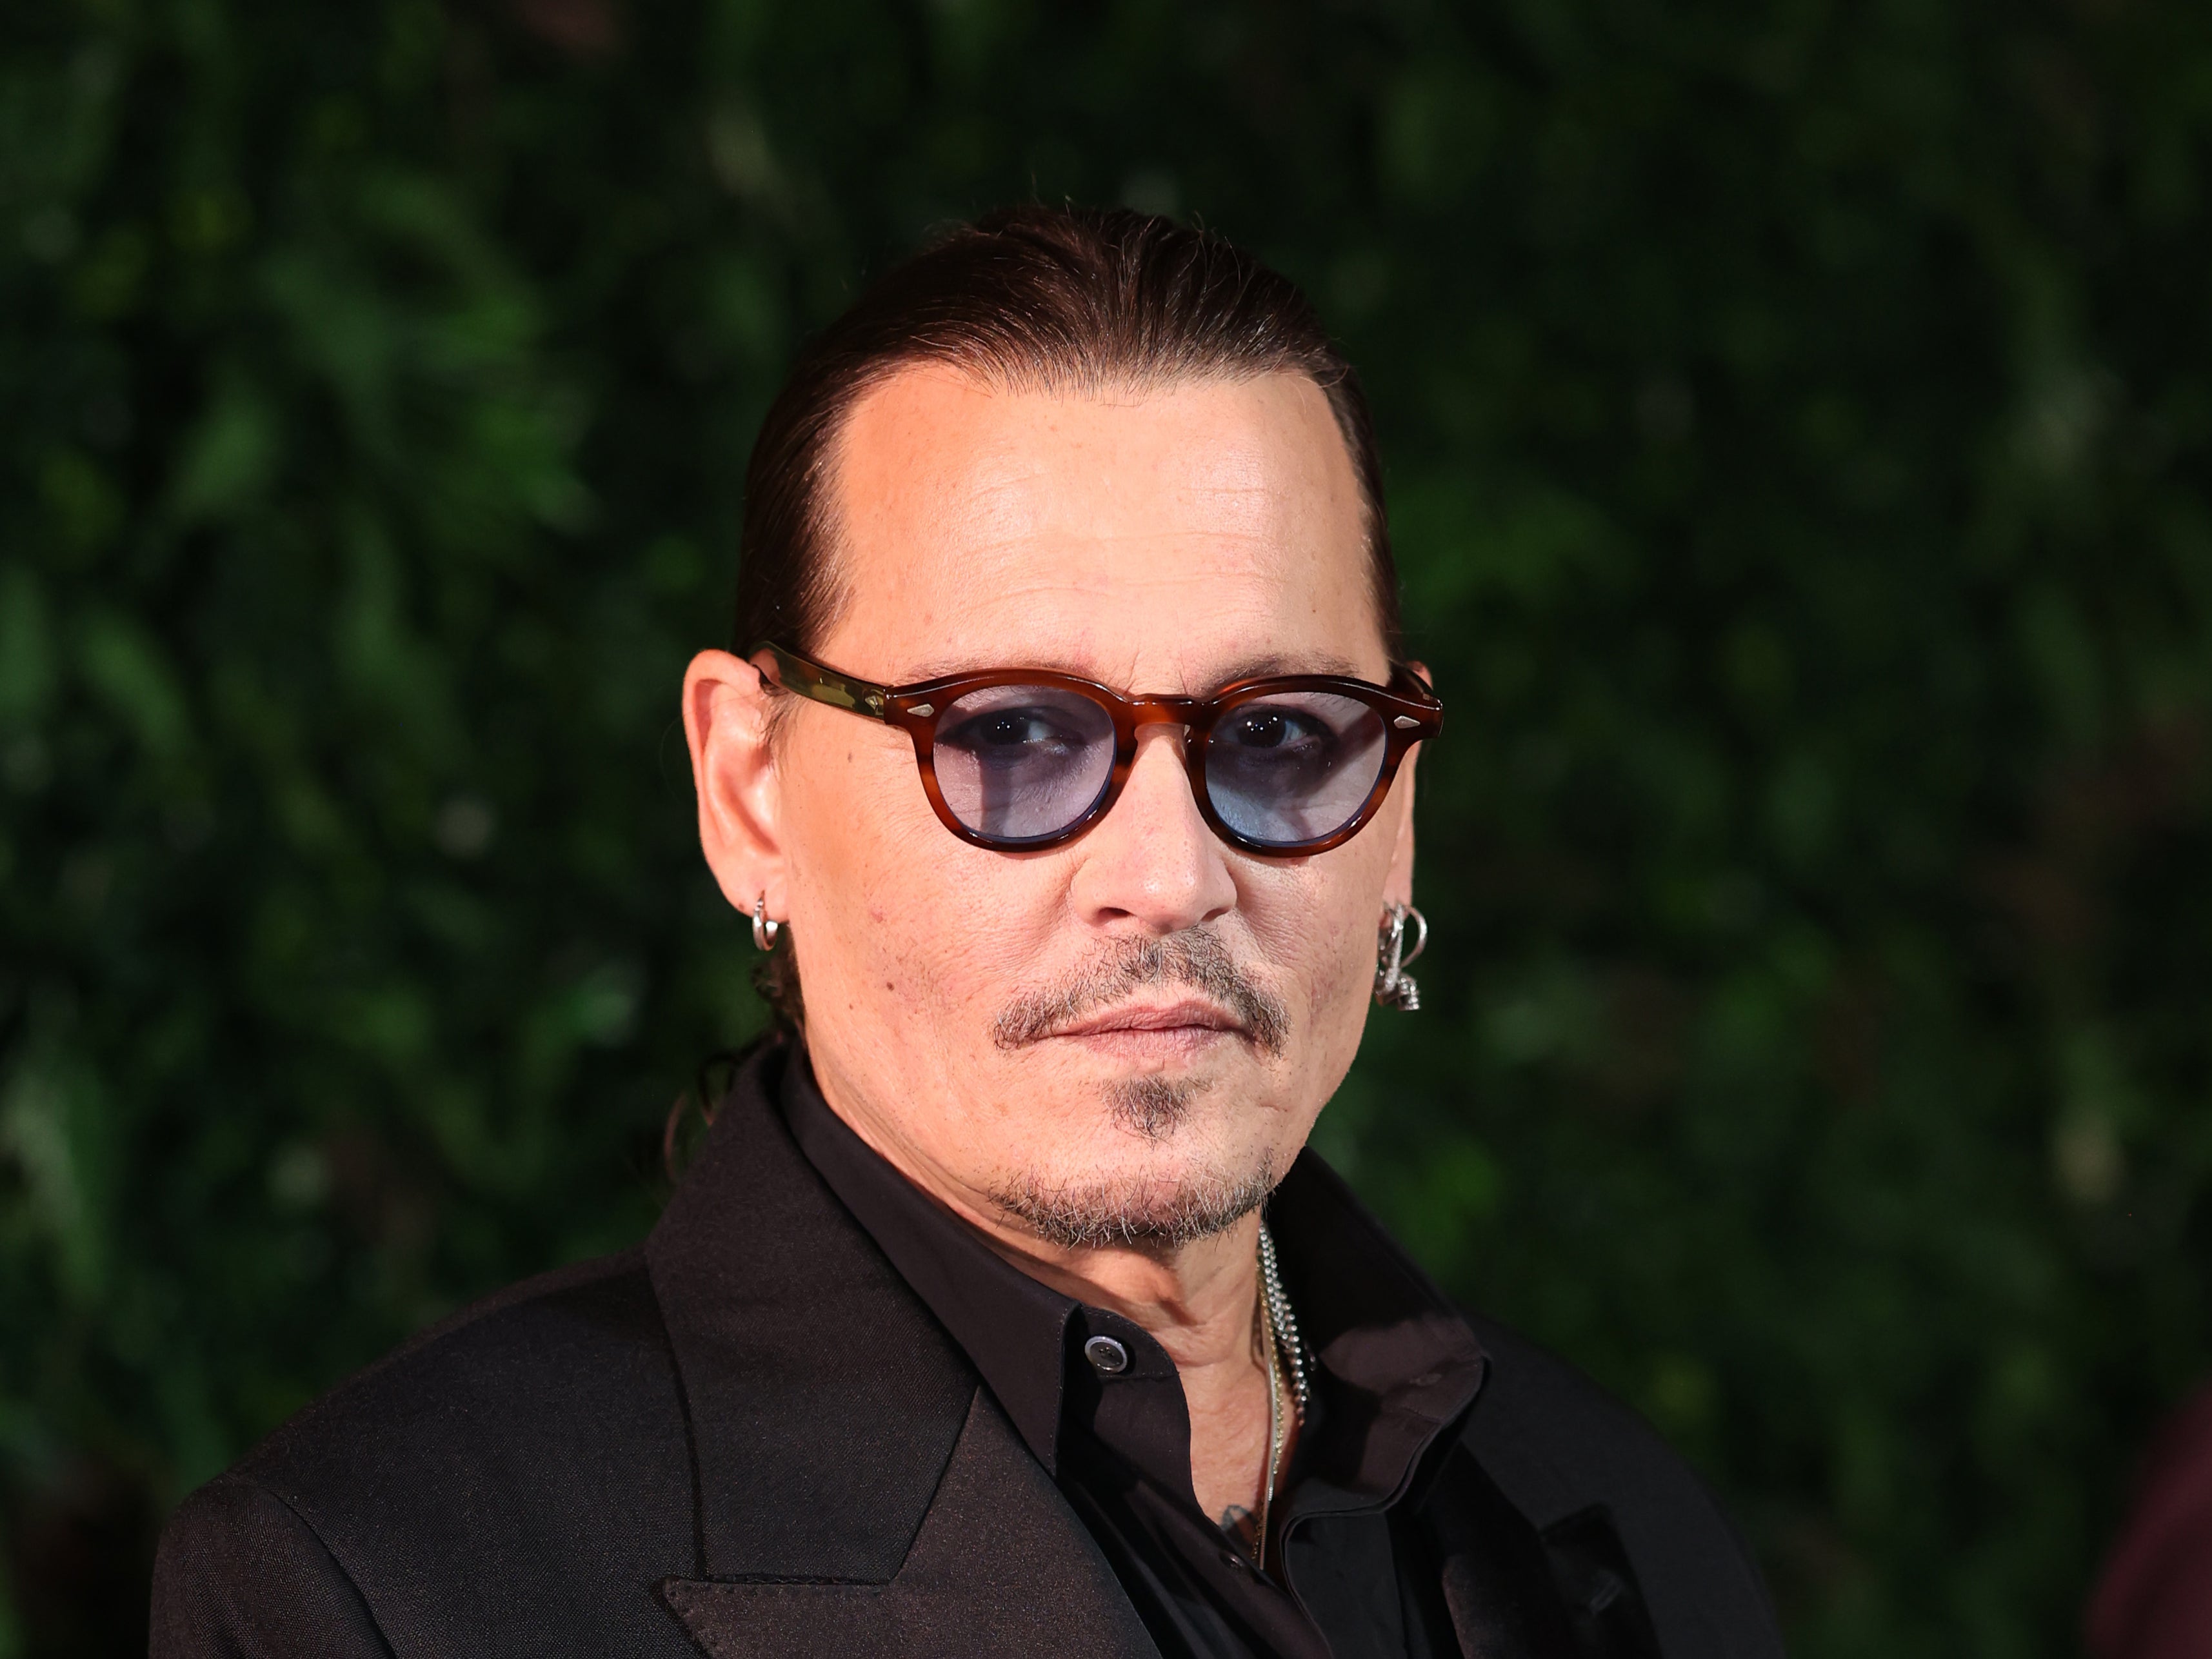 Johnny Depp says his recollection ‘differs greatly’ from Lola Glaudini’s